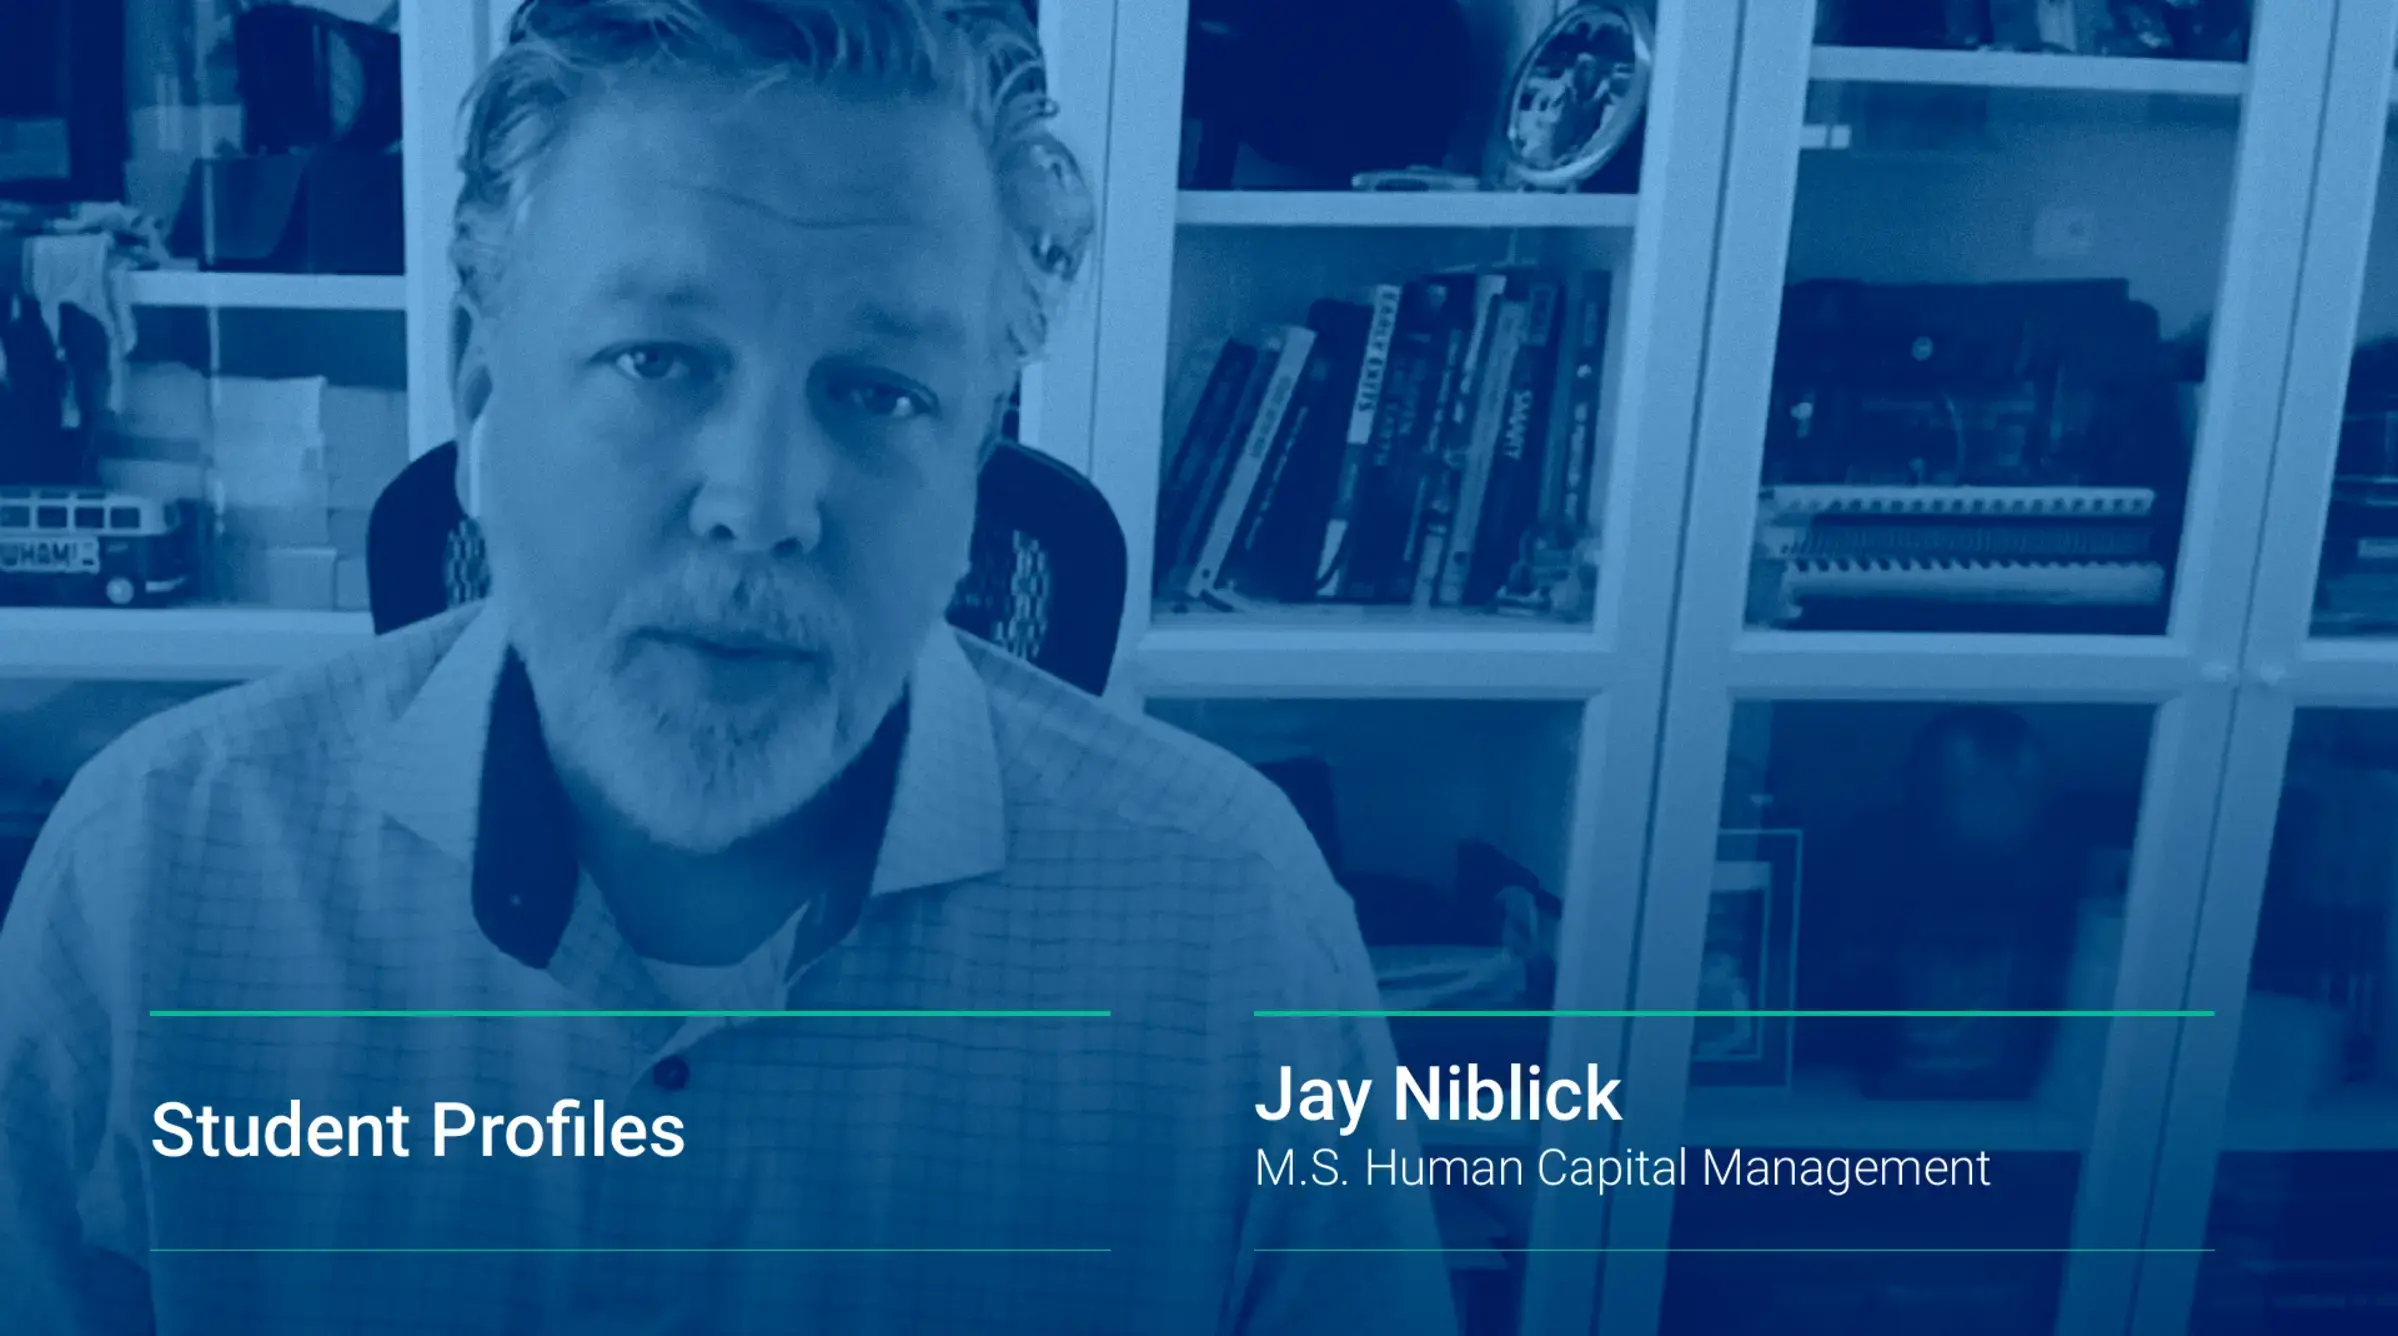 A still from Jay Niblick's video interview about the Human Capital Management master's program.